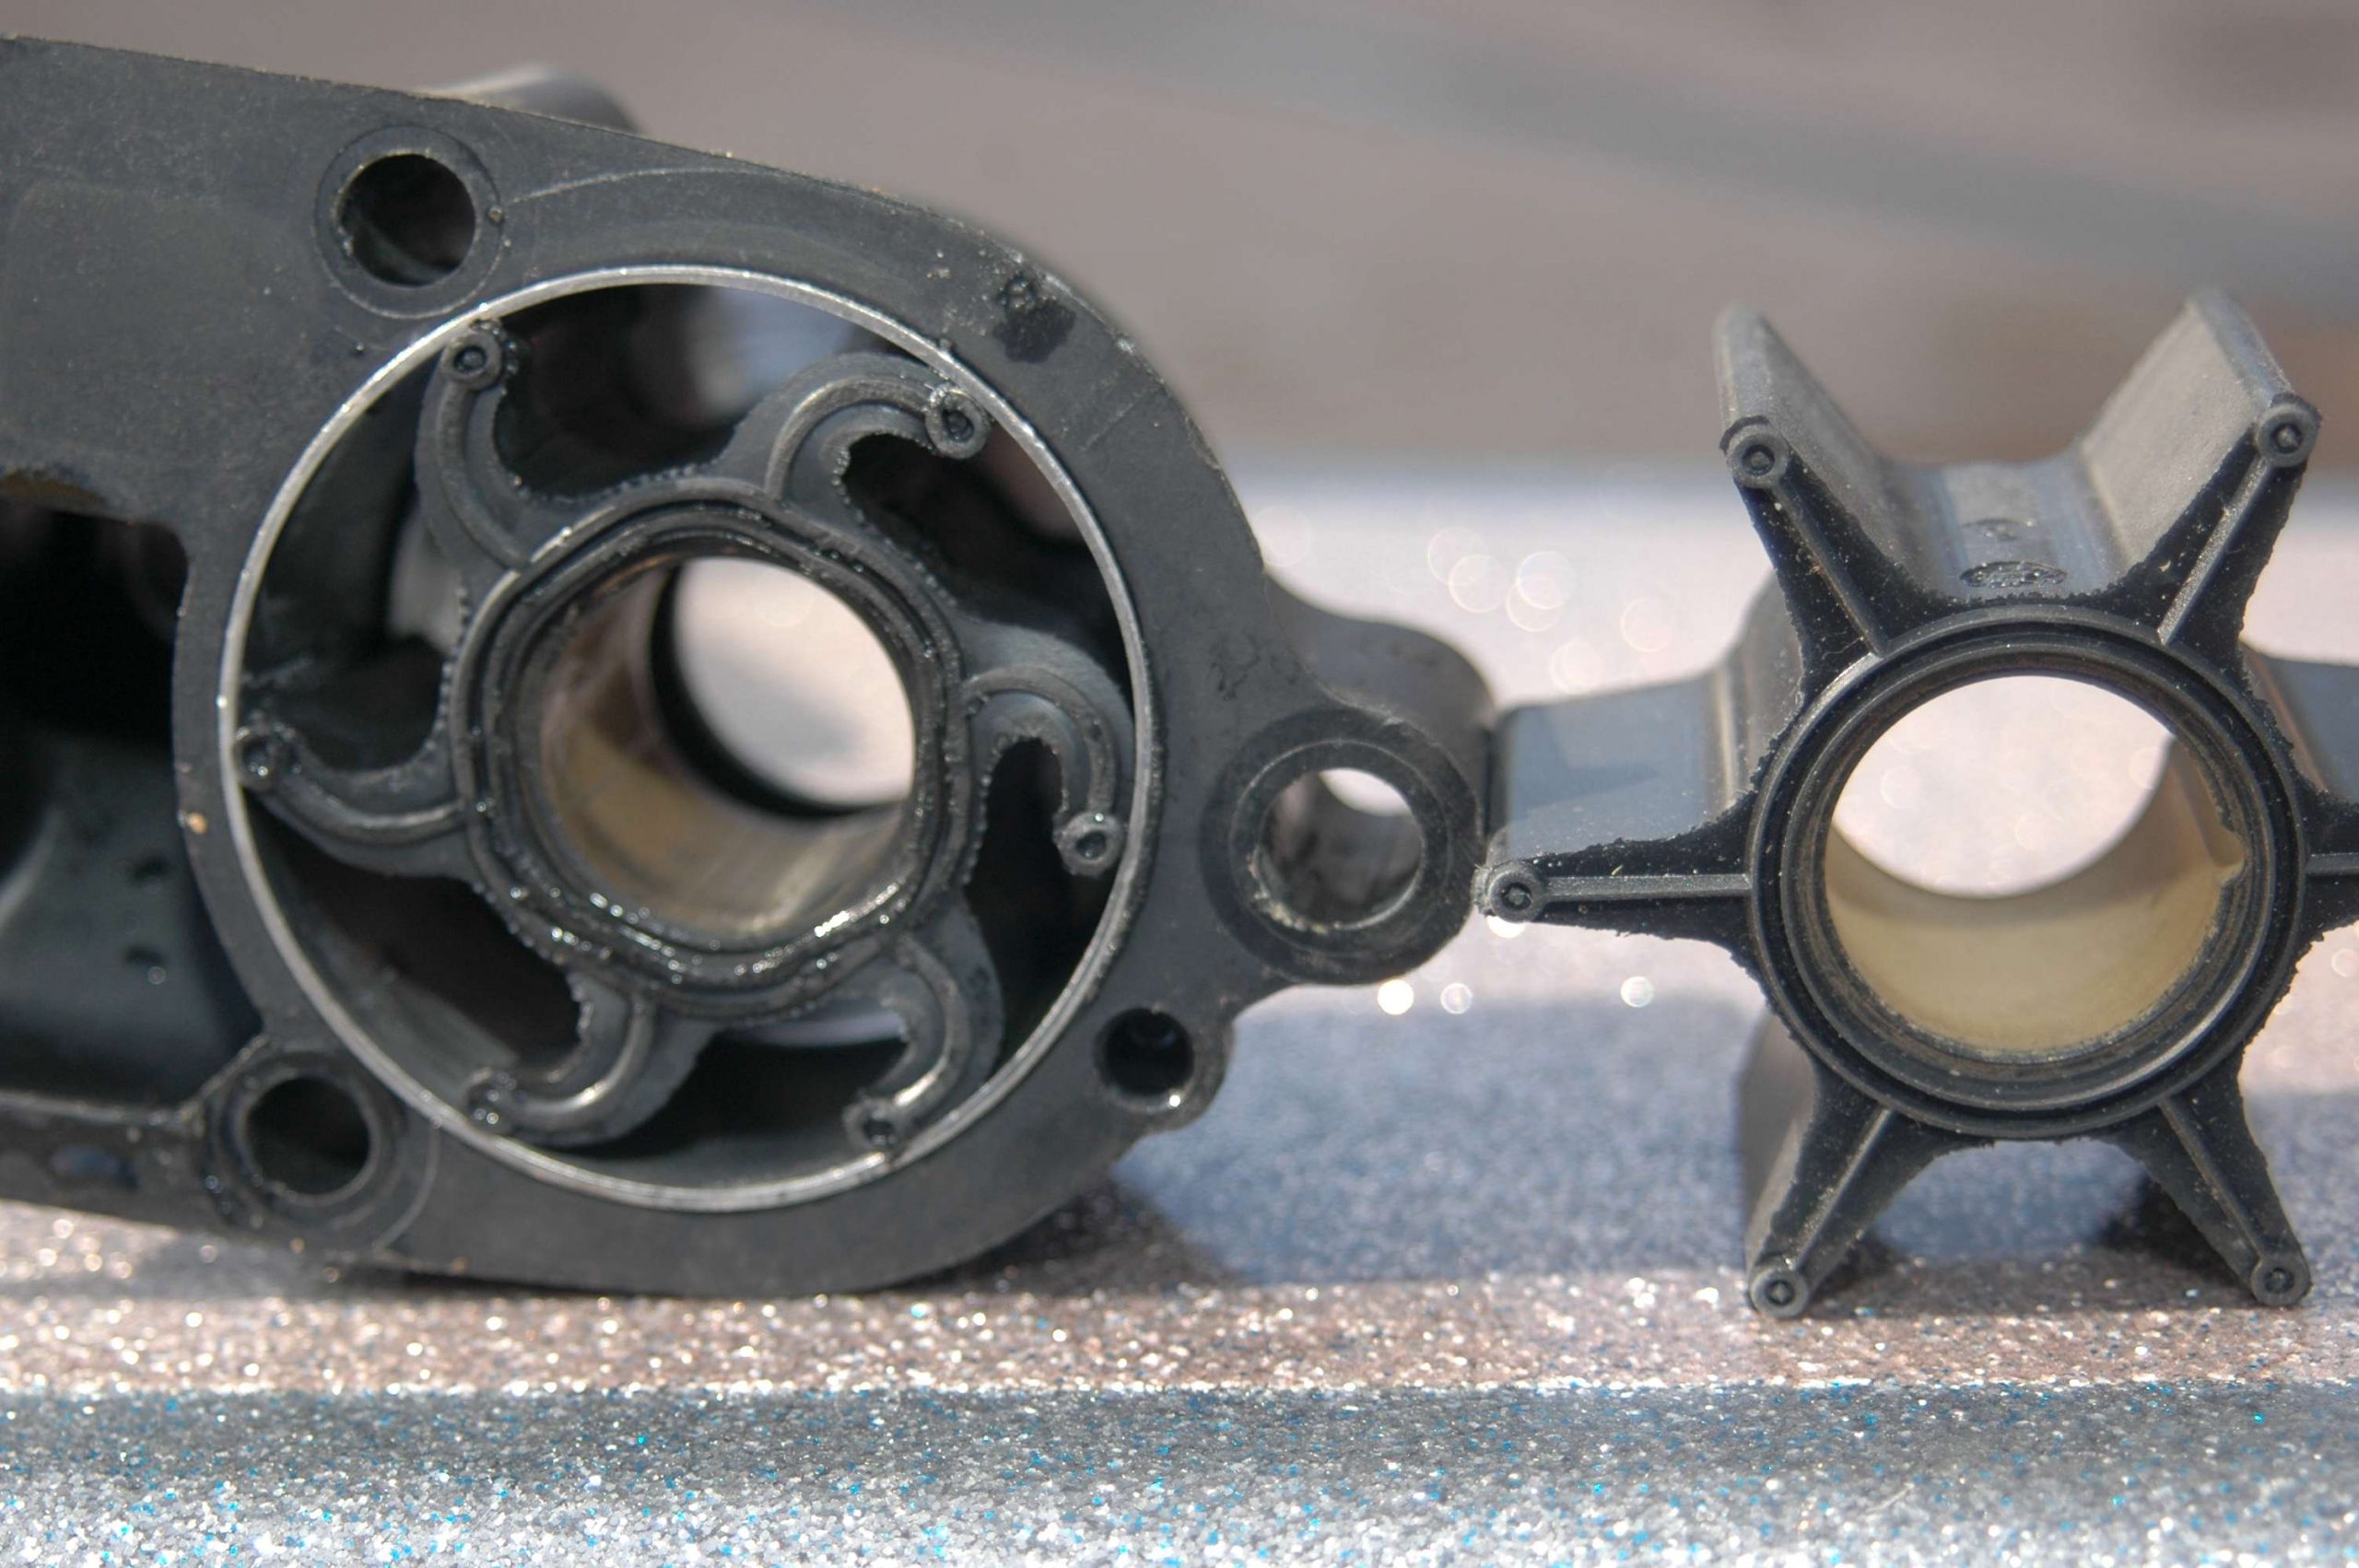 <em>REBUILDING THE WATER PUMP</em>
<br>The old impeller is on the left in its housing next to a new impeller. The rubber arms eventually wear out and lose their ability to drive water through the outboardâs cooling system.